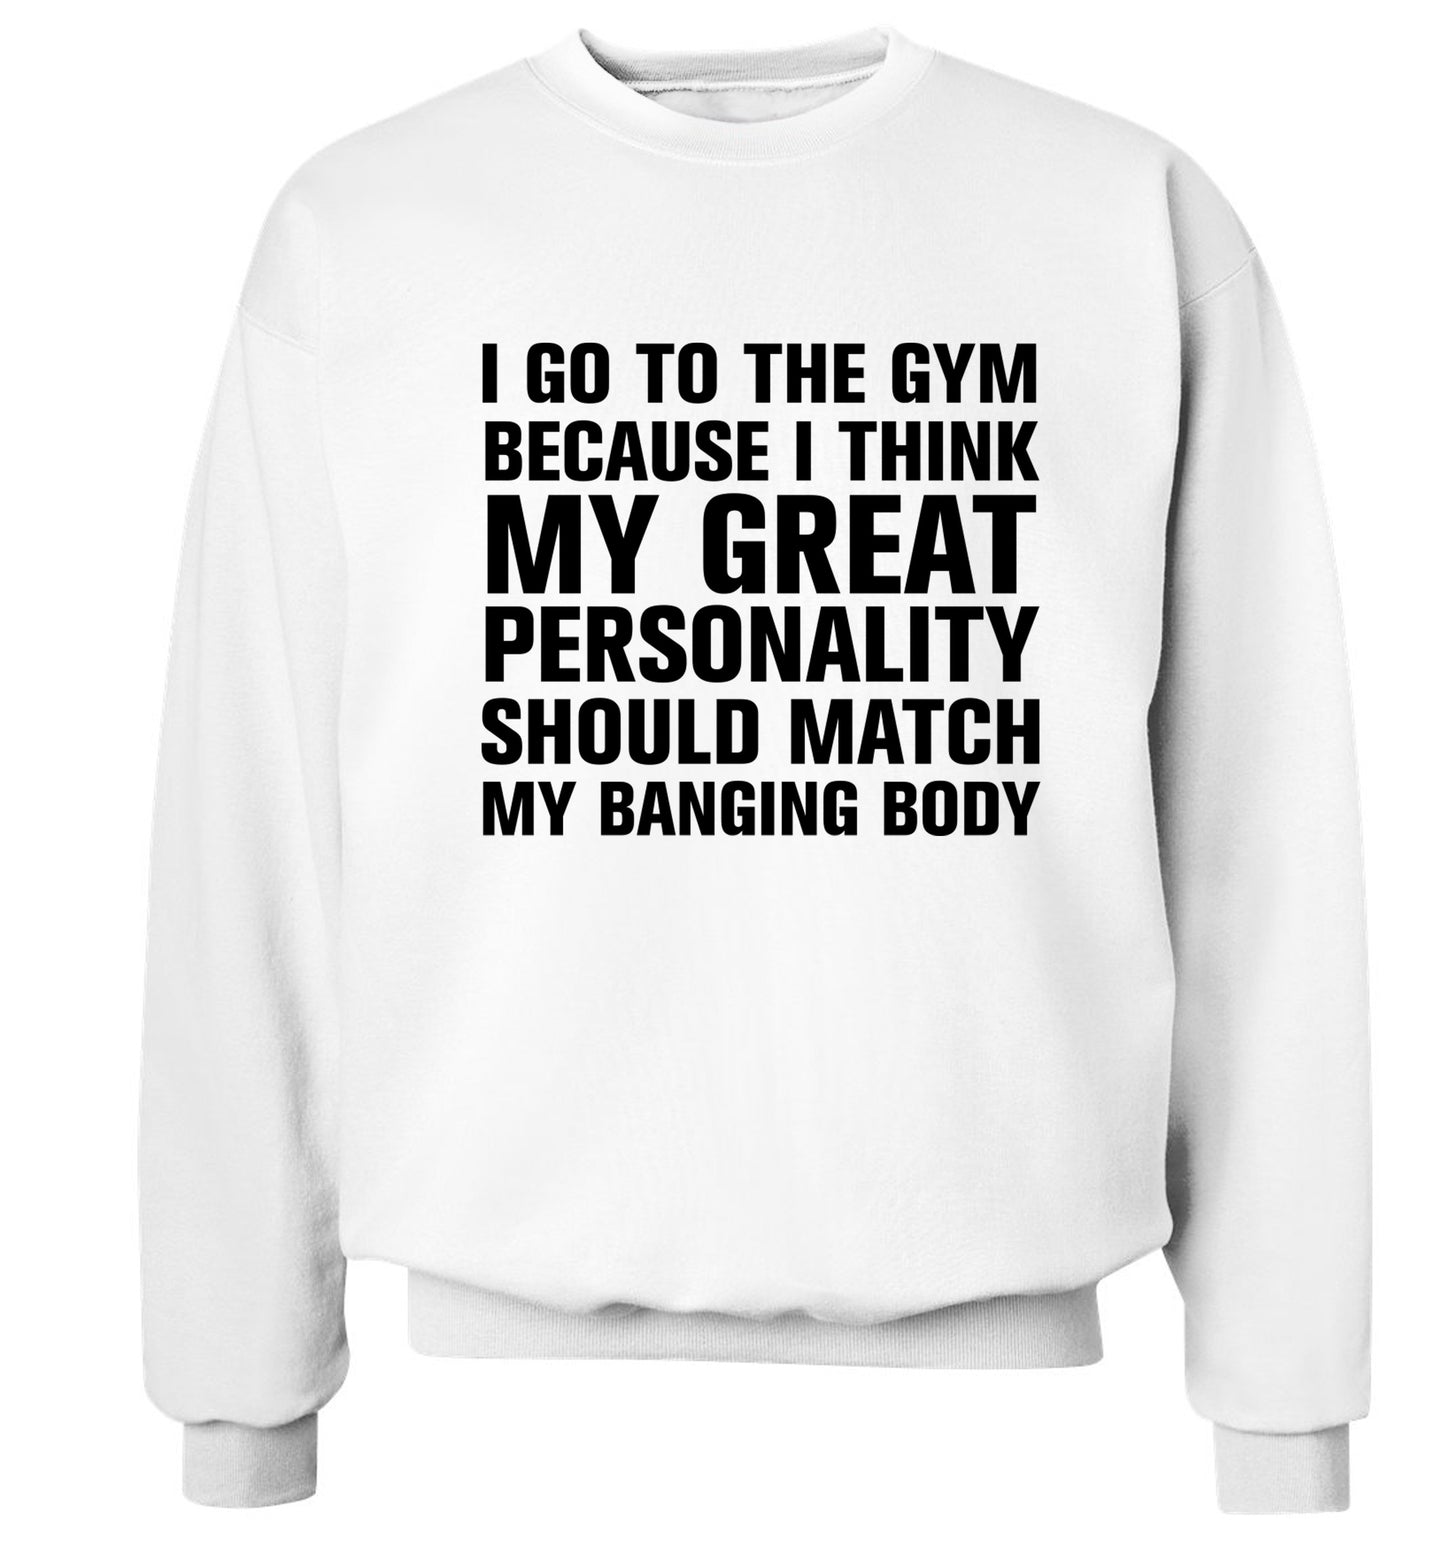 I go to the gym because I think my great personality should match my banging body Adult's unisex white Sweater 2XL